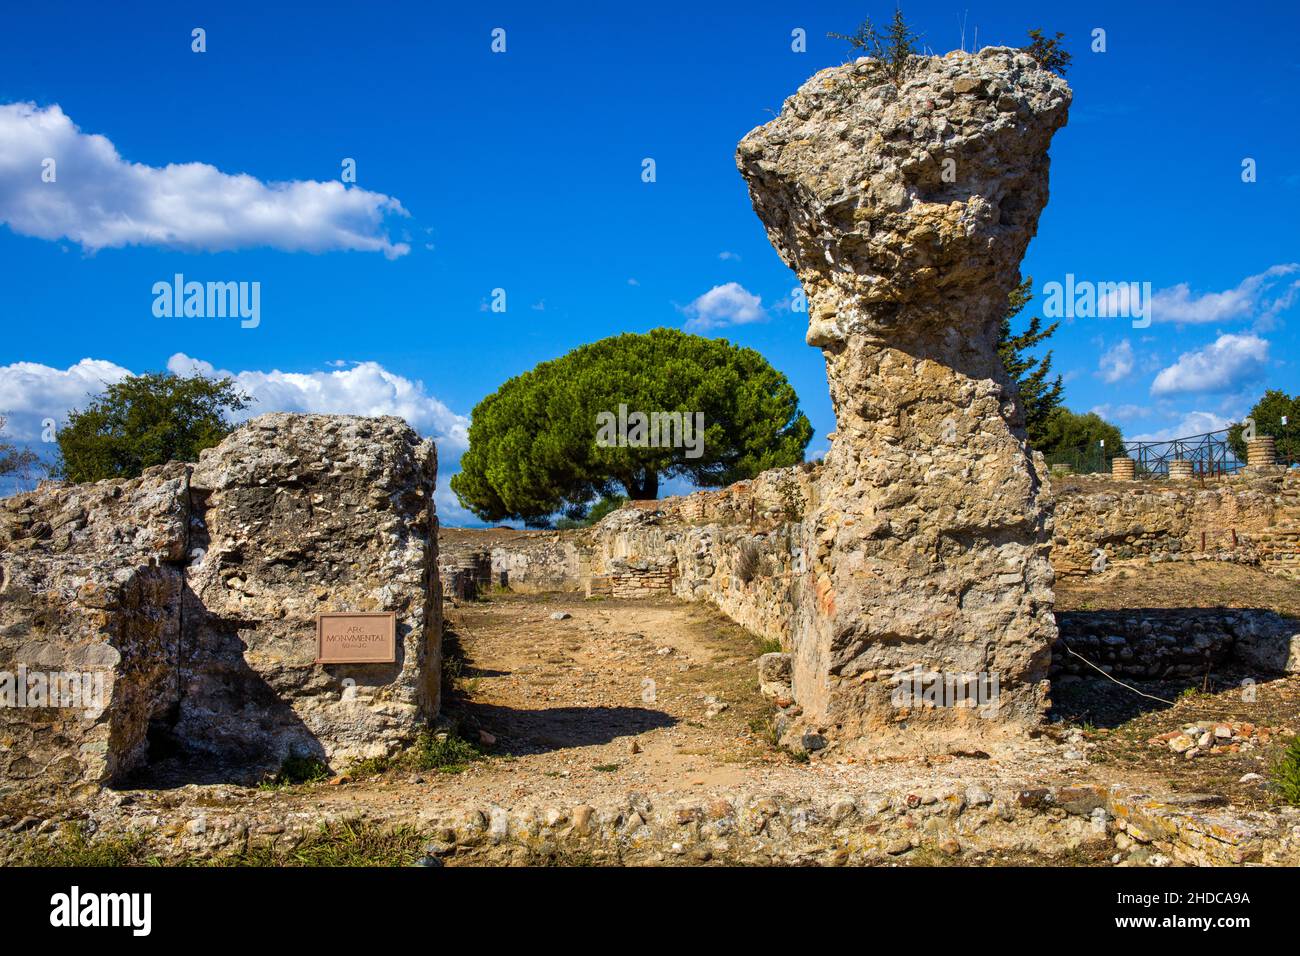 Remains of an archway, excavation site, Roman city of Aleria, Corsica, Aleria, Corsica, France, Europe Stock Photo